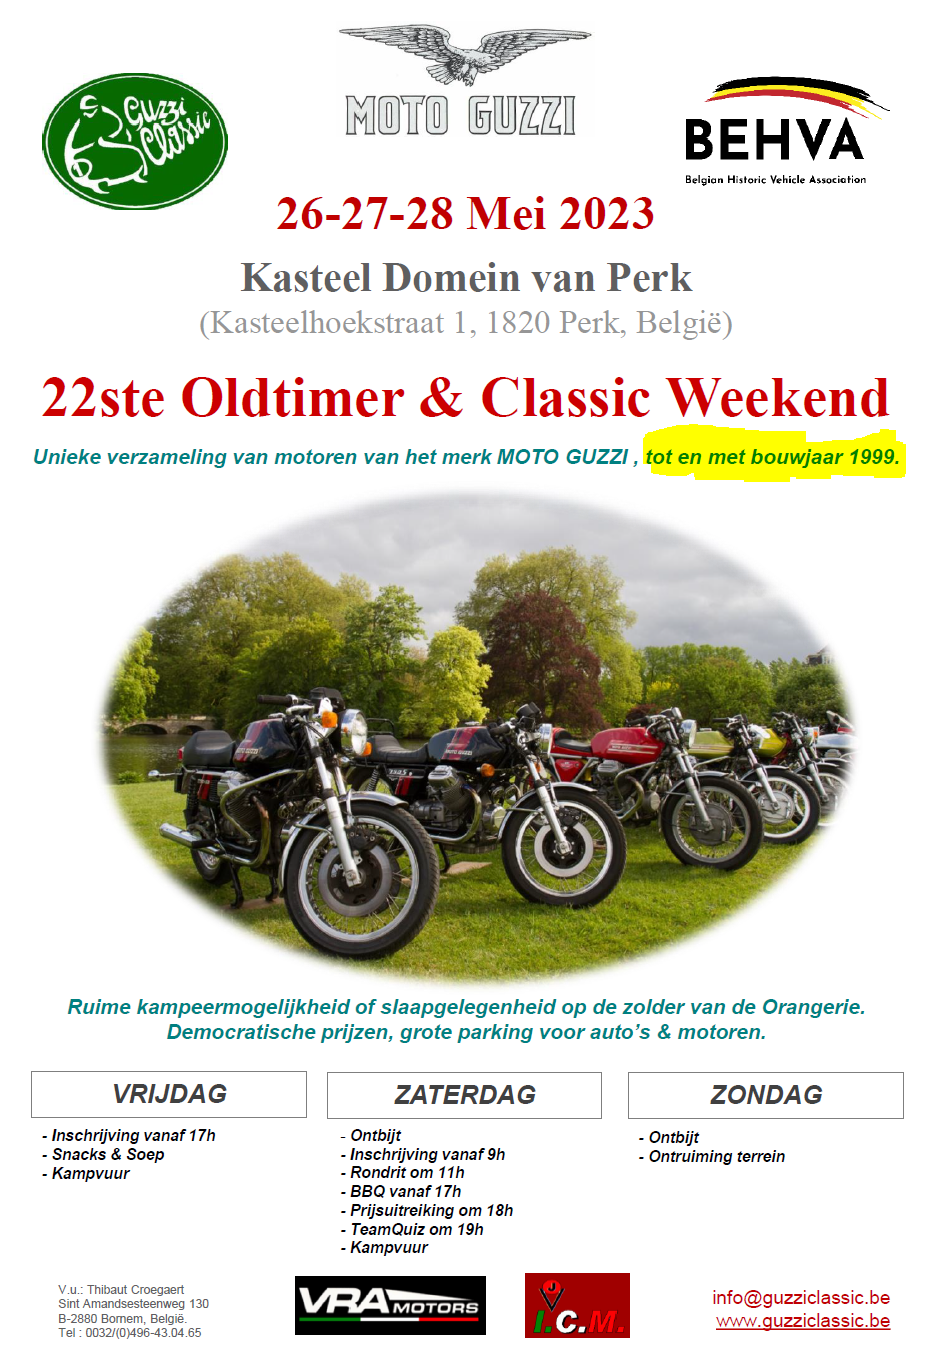 22nd Oldtimer and Classic weekend of GuzziClassic